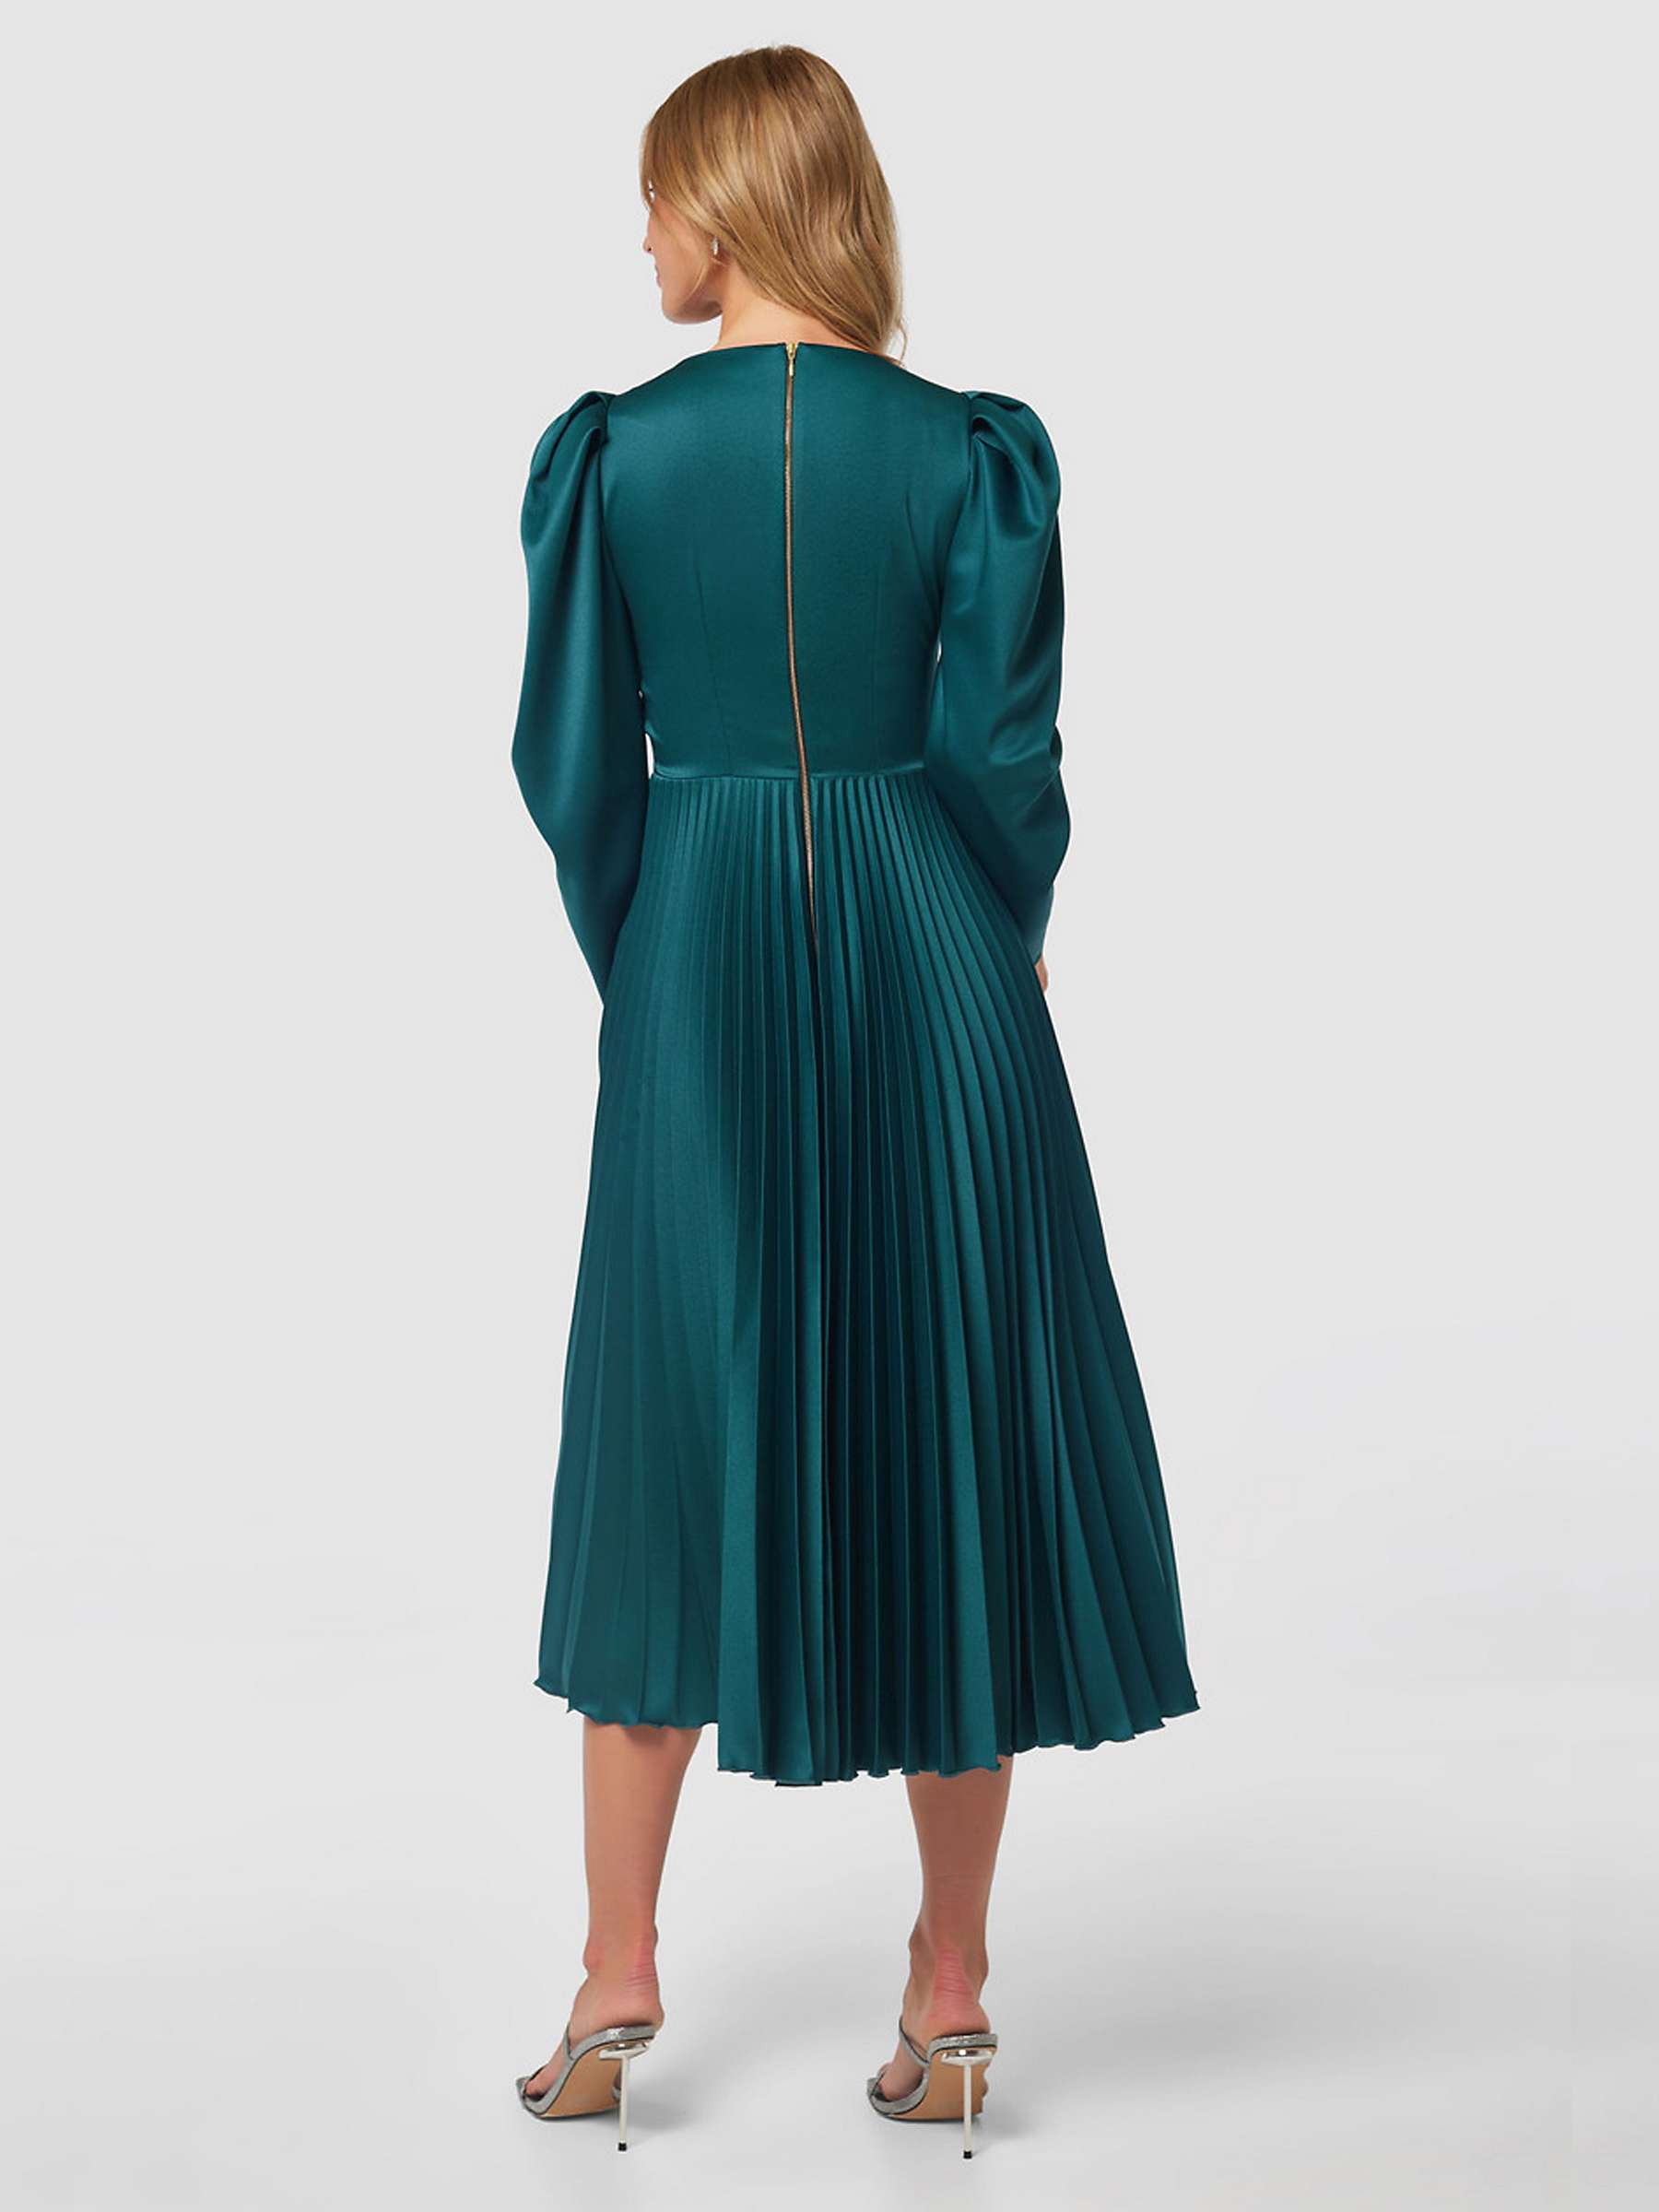 Buy Closet London Pleated Dress, Teal Online at johnlewis.com